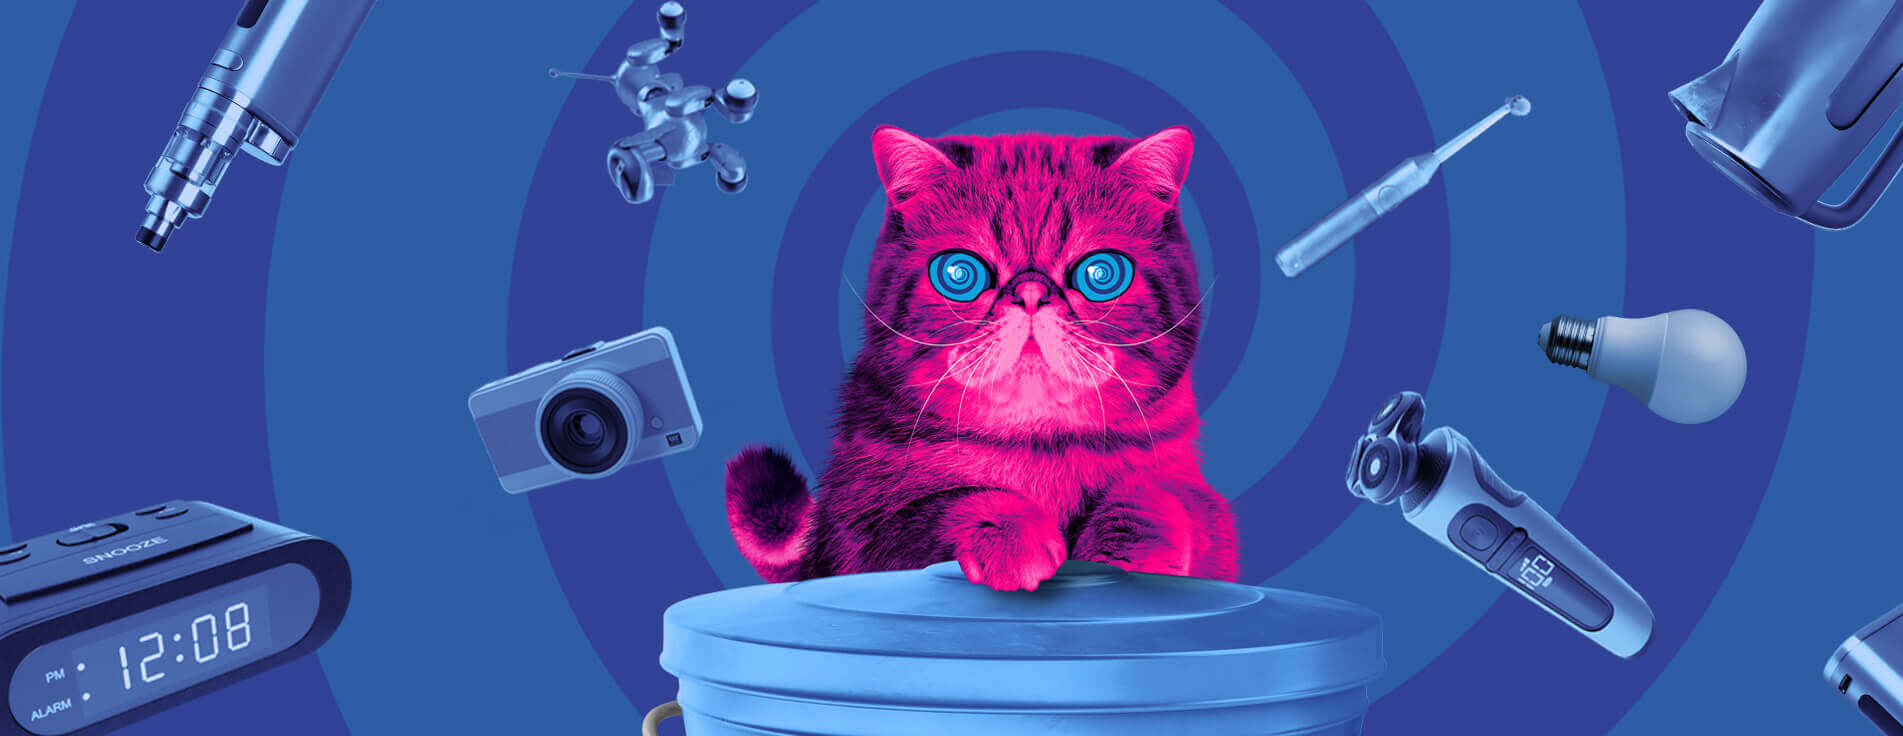 Magenta cat 'Hypnocat' resting on a dustbin with electrical items floating around his head in a blue spiral